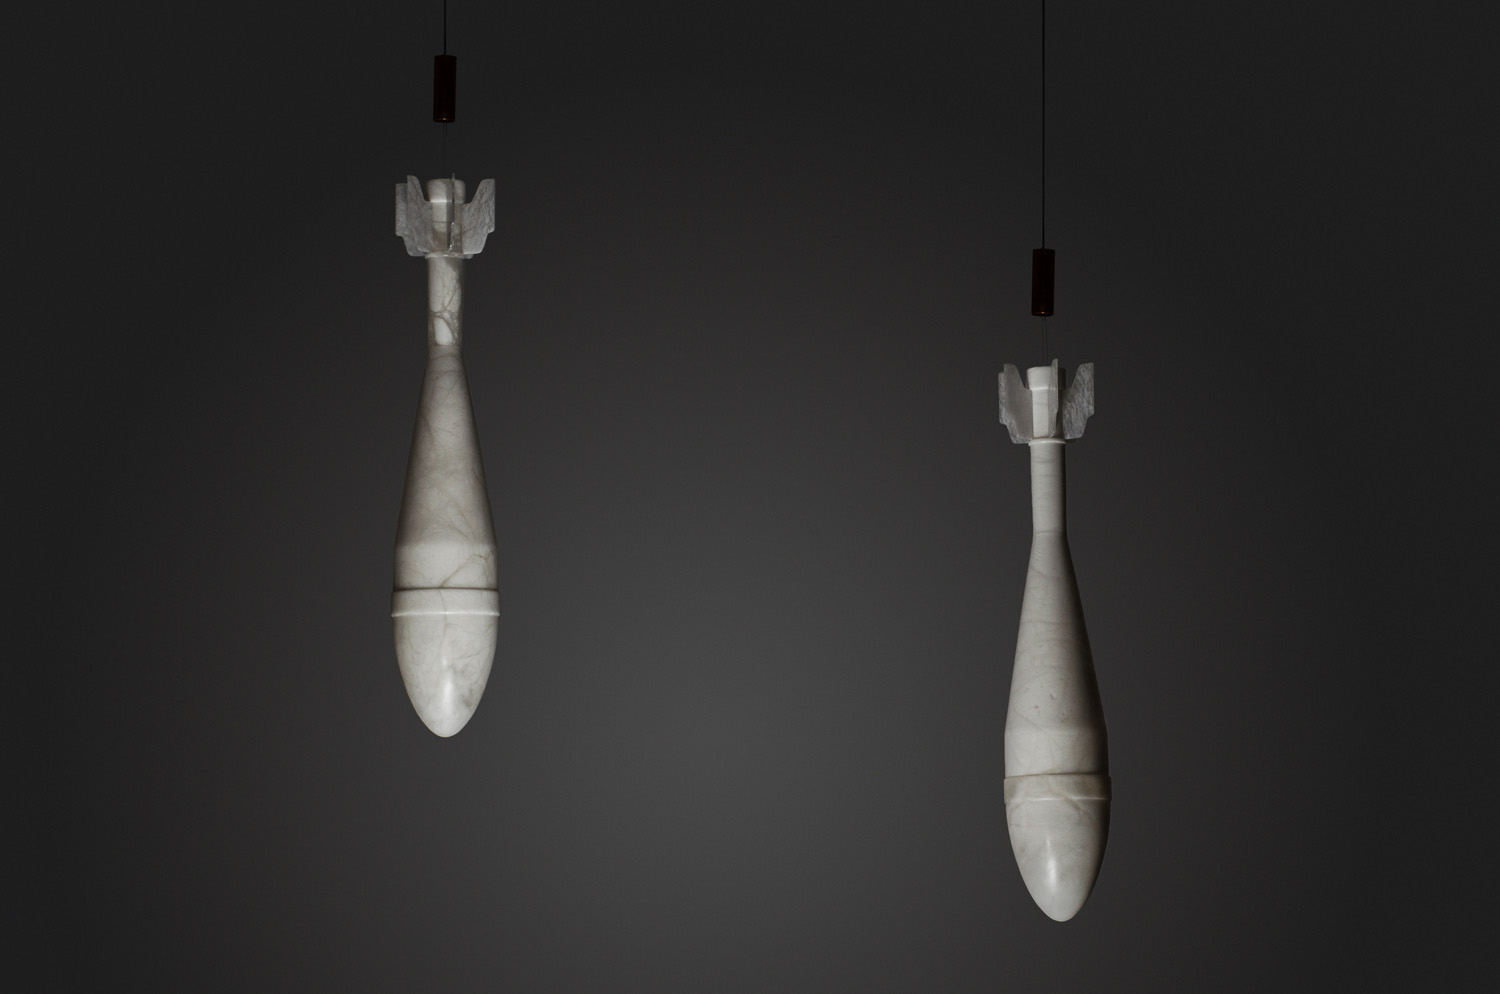 Sculpture lamp made with Alabaster stone by Amarist studio